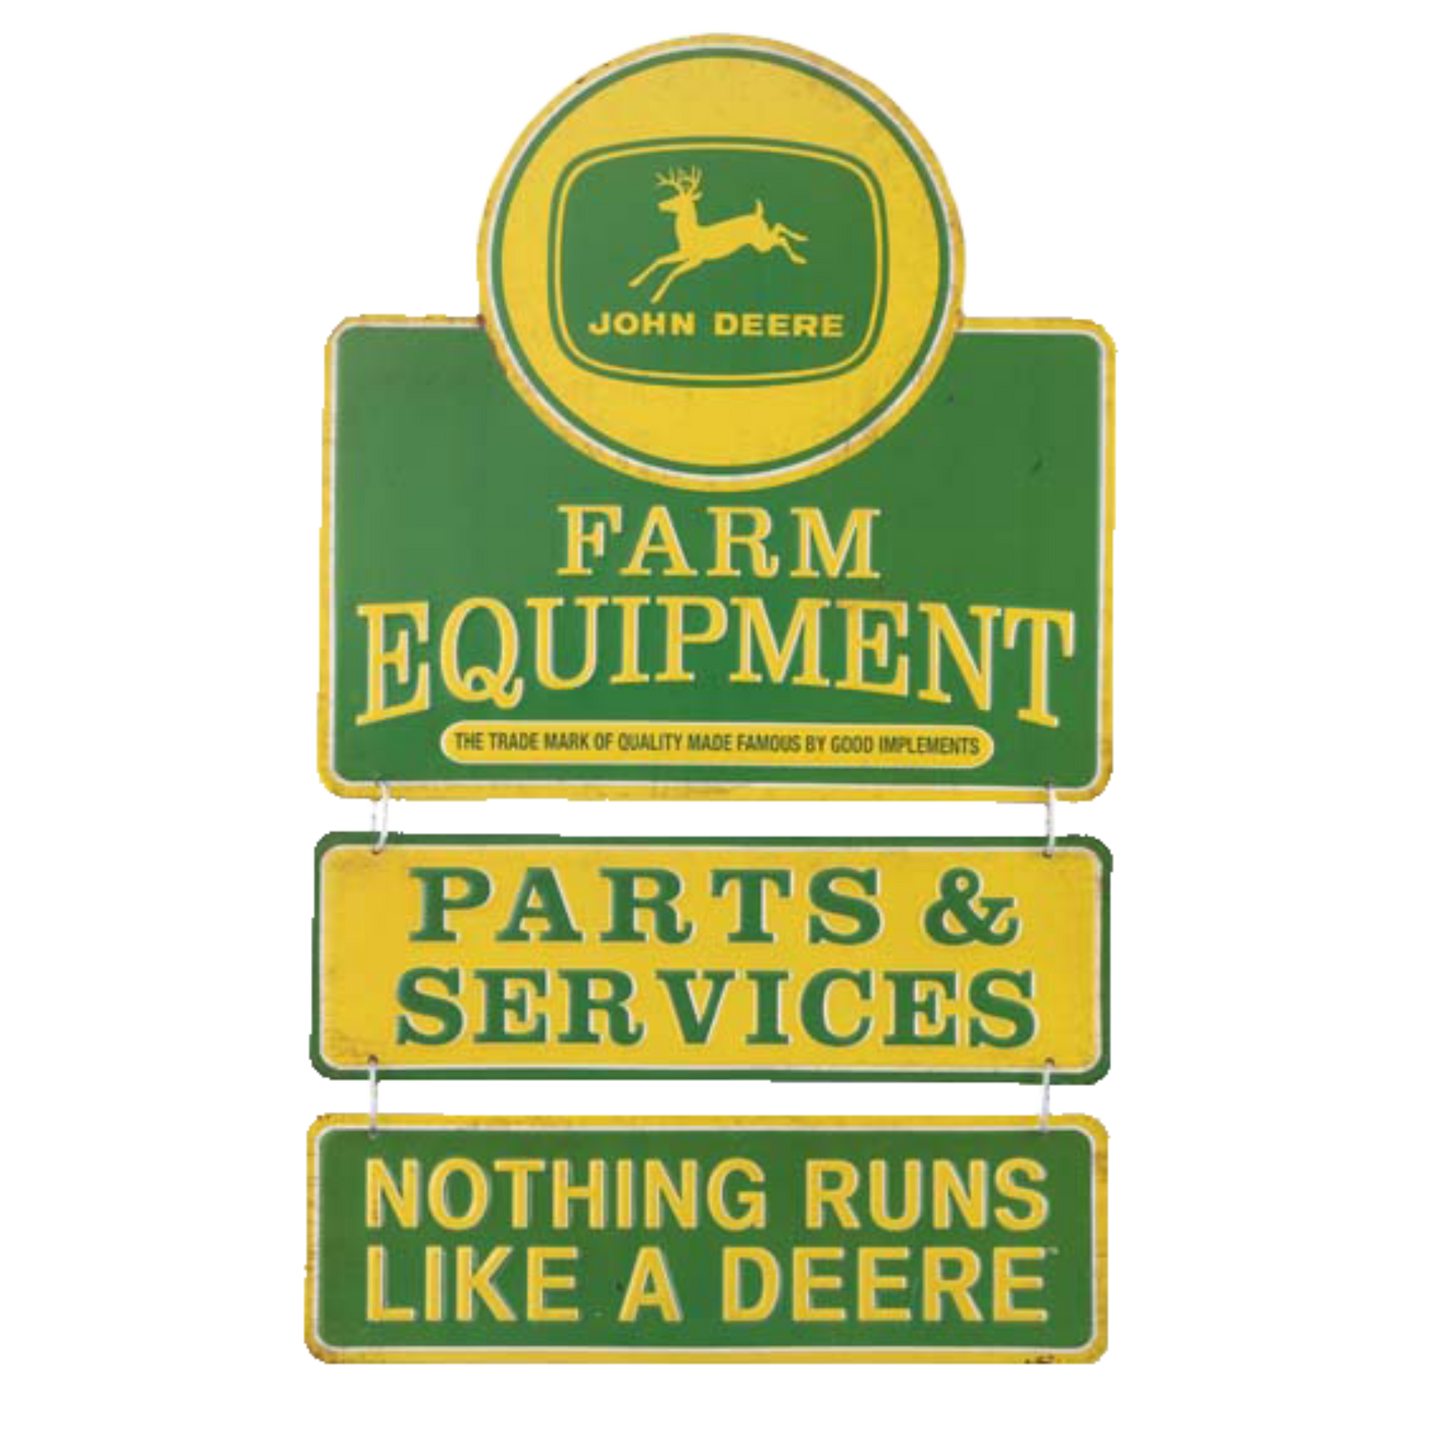 Three linked tin signs in green and yellow, displaying John Deere's logo, "Farm Equipment", "Parts & Services", and the slogan "Nothing Runs Like a Deere".